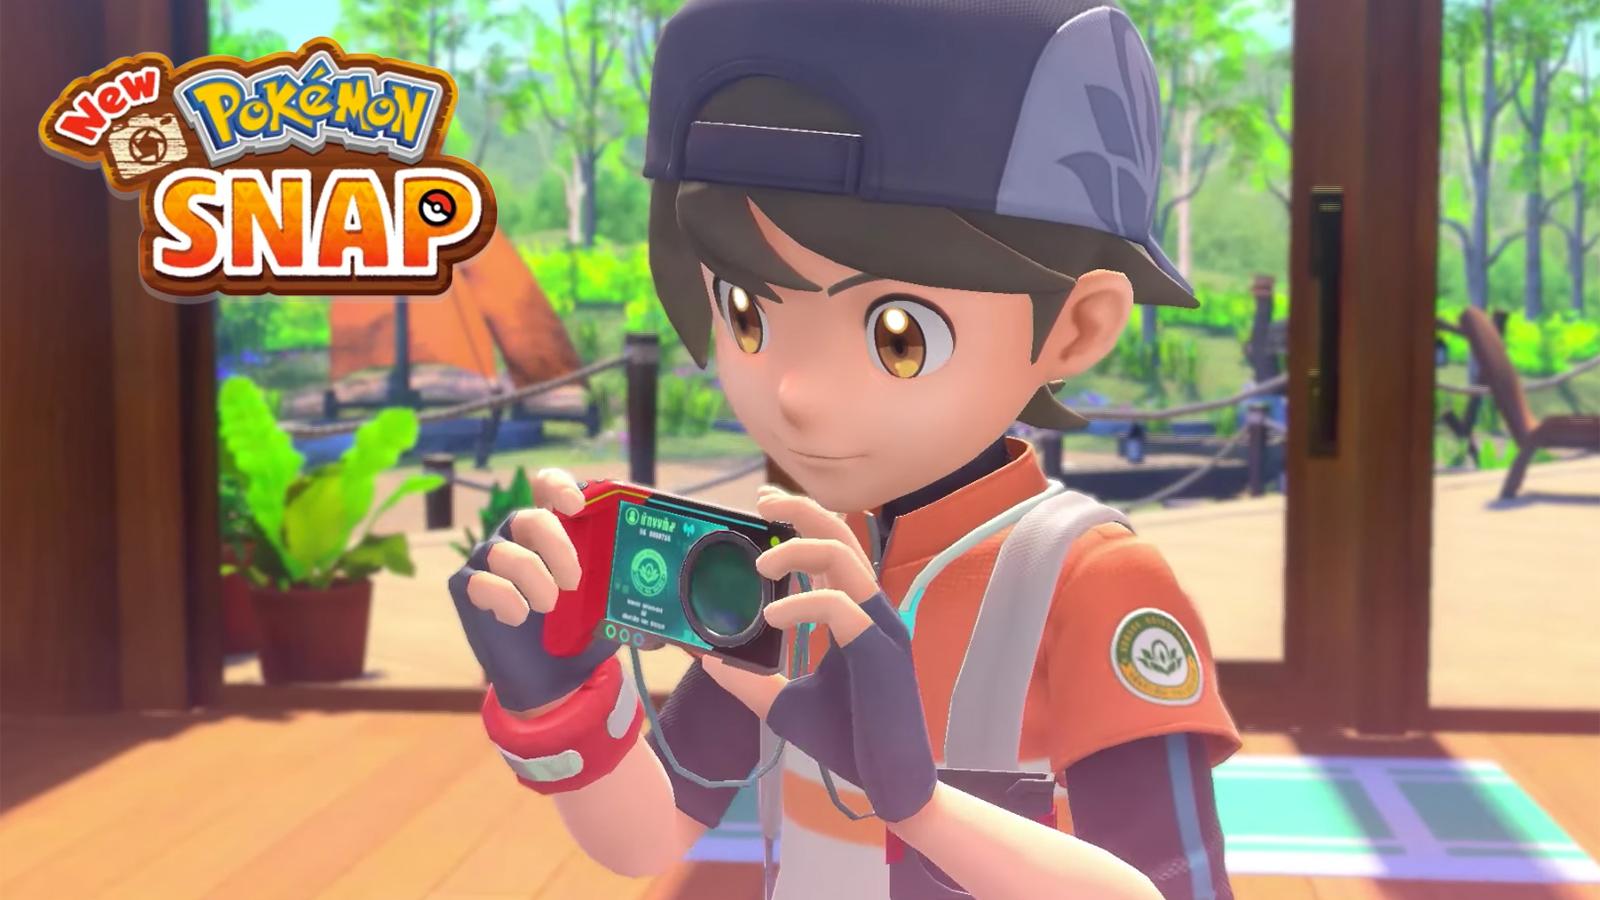 story, Pokemon Release trailer, - & Snap: preorders gameplay Dexerto date, details New